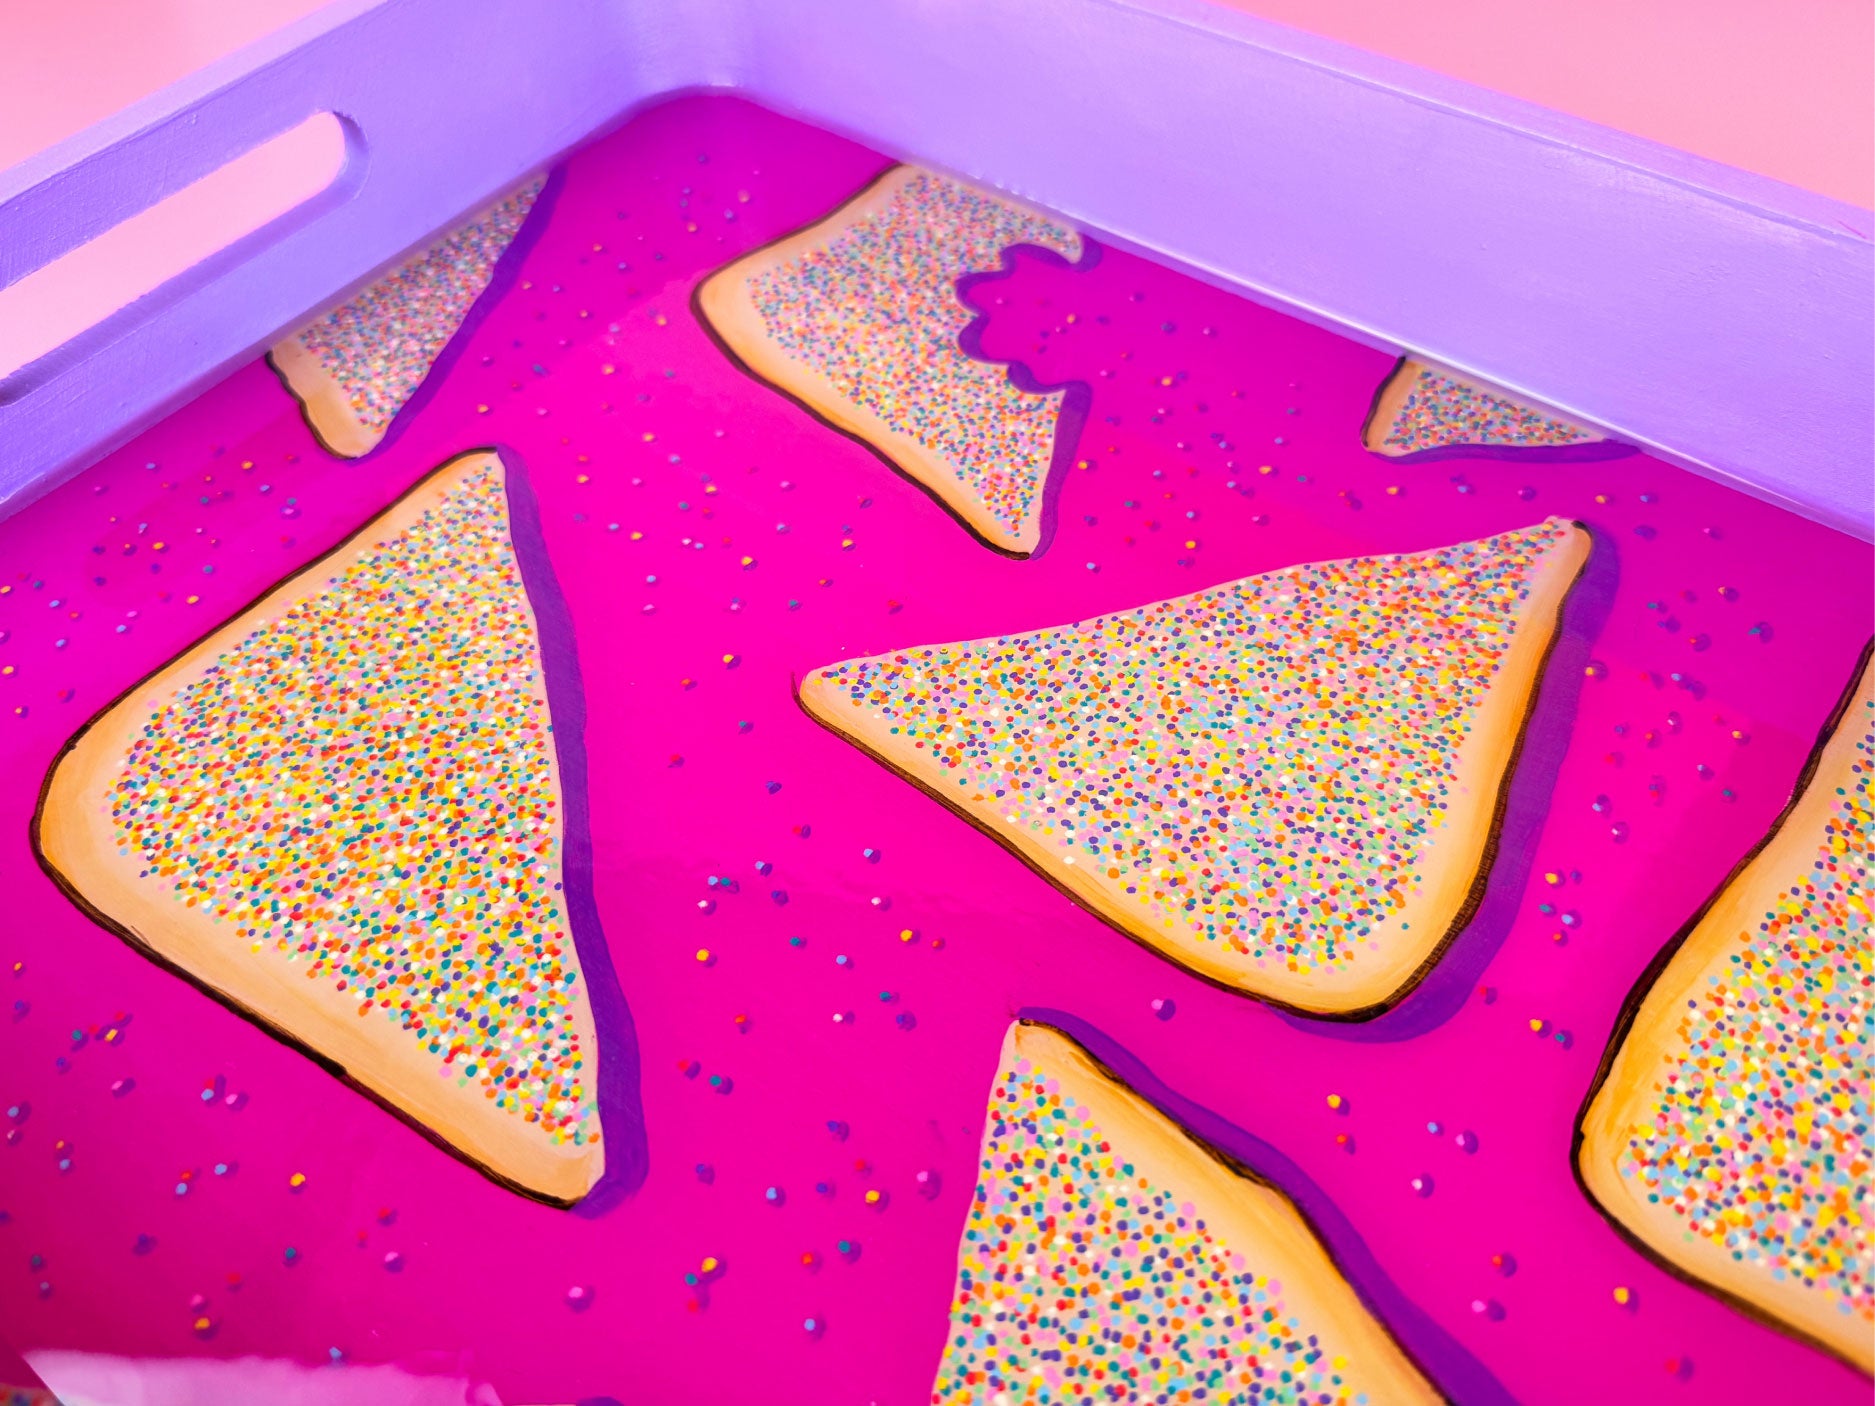 Hand-painted Resin Tray: Fairybread (Purple/Pink)